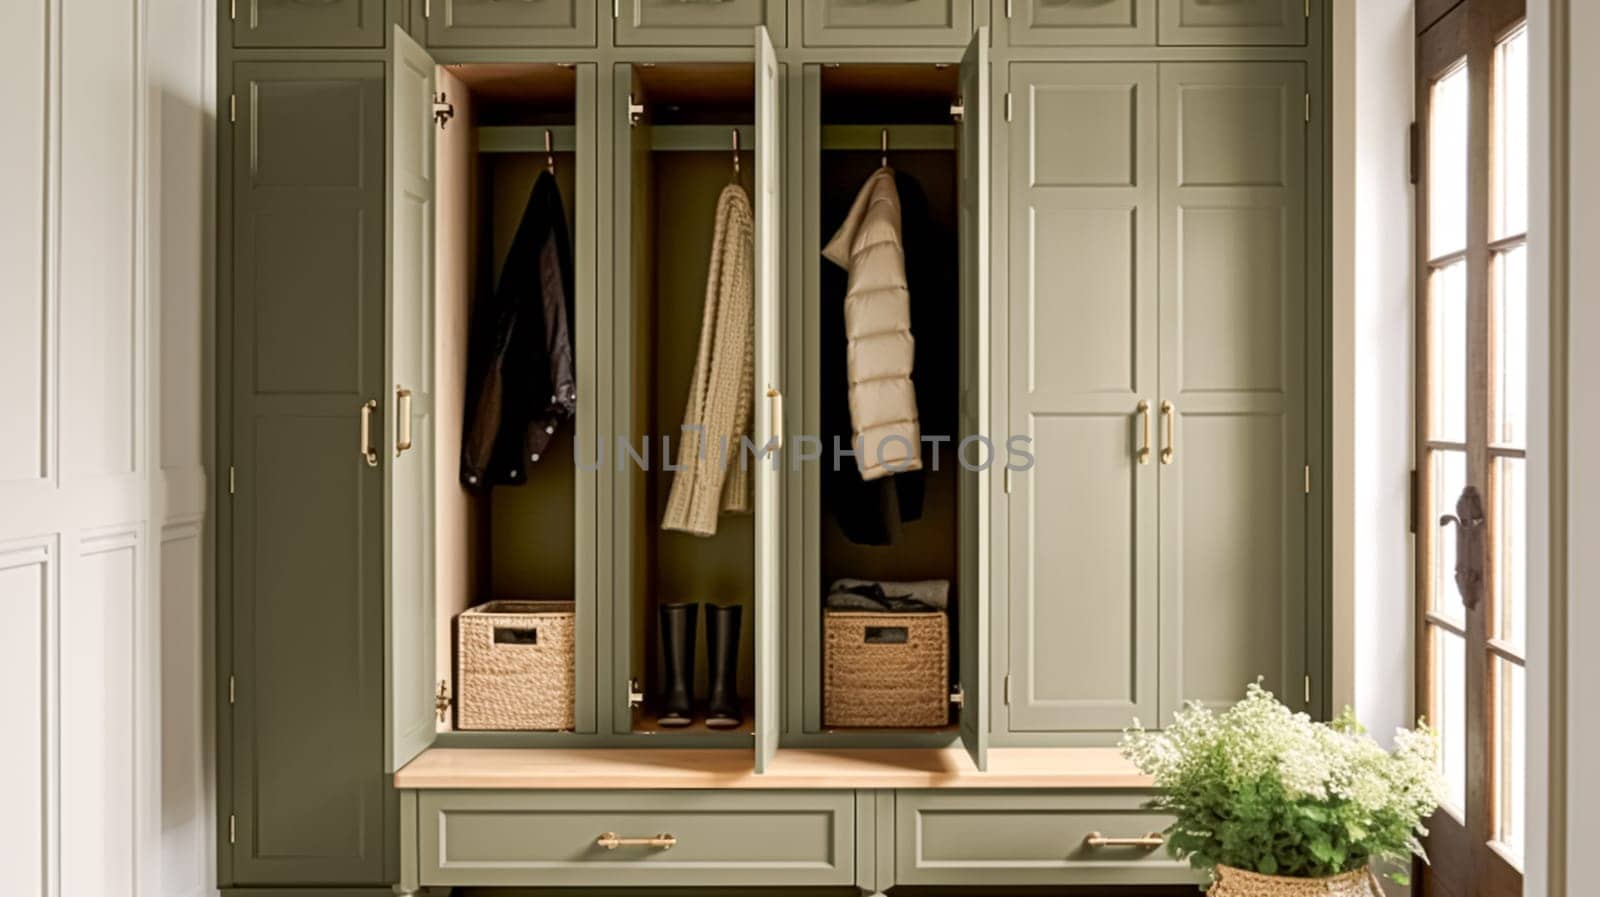 Earthy green cottage dressing room decor, interior design and country house home decor, boot room or walk-in wardrobe furniture, English countryside style interiors